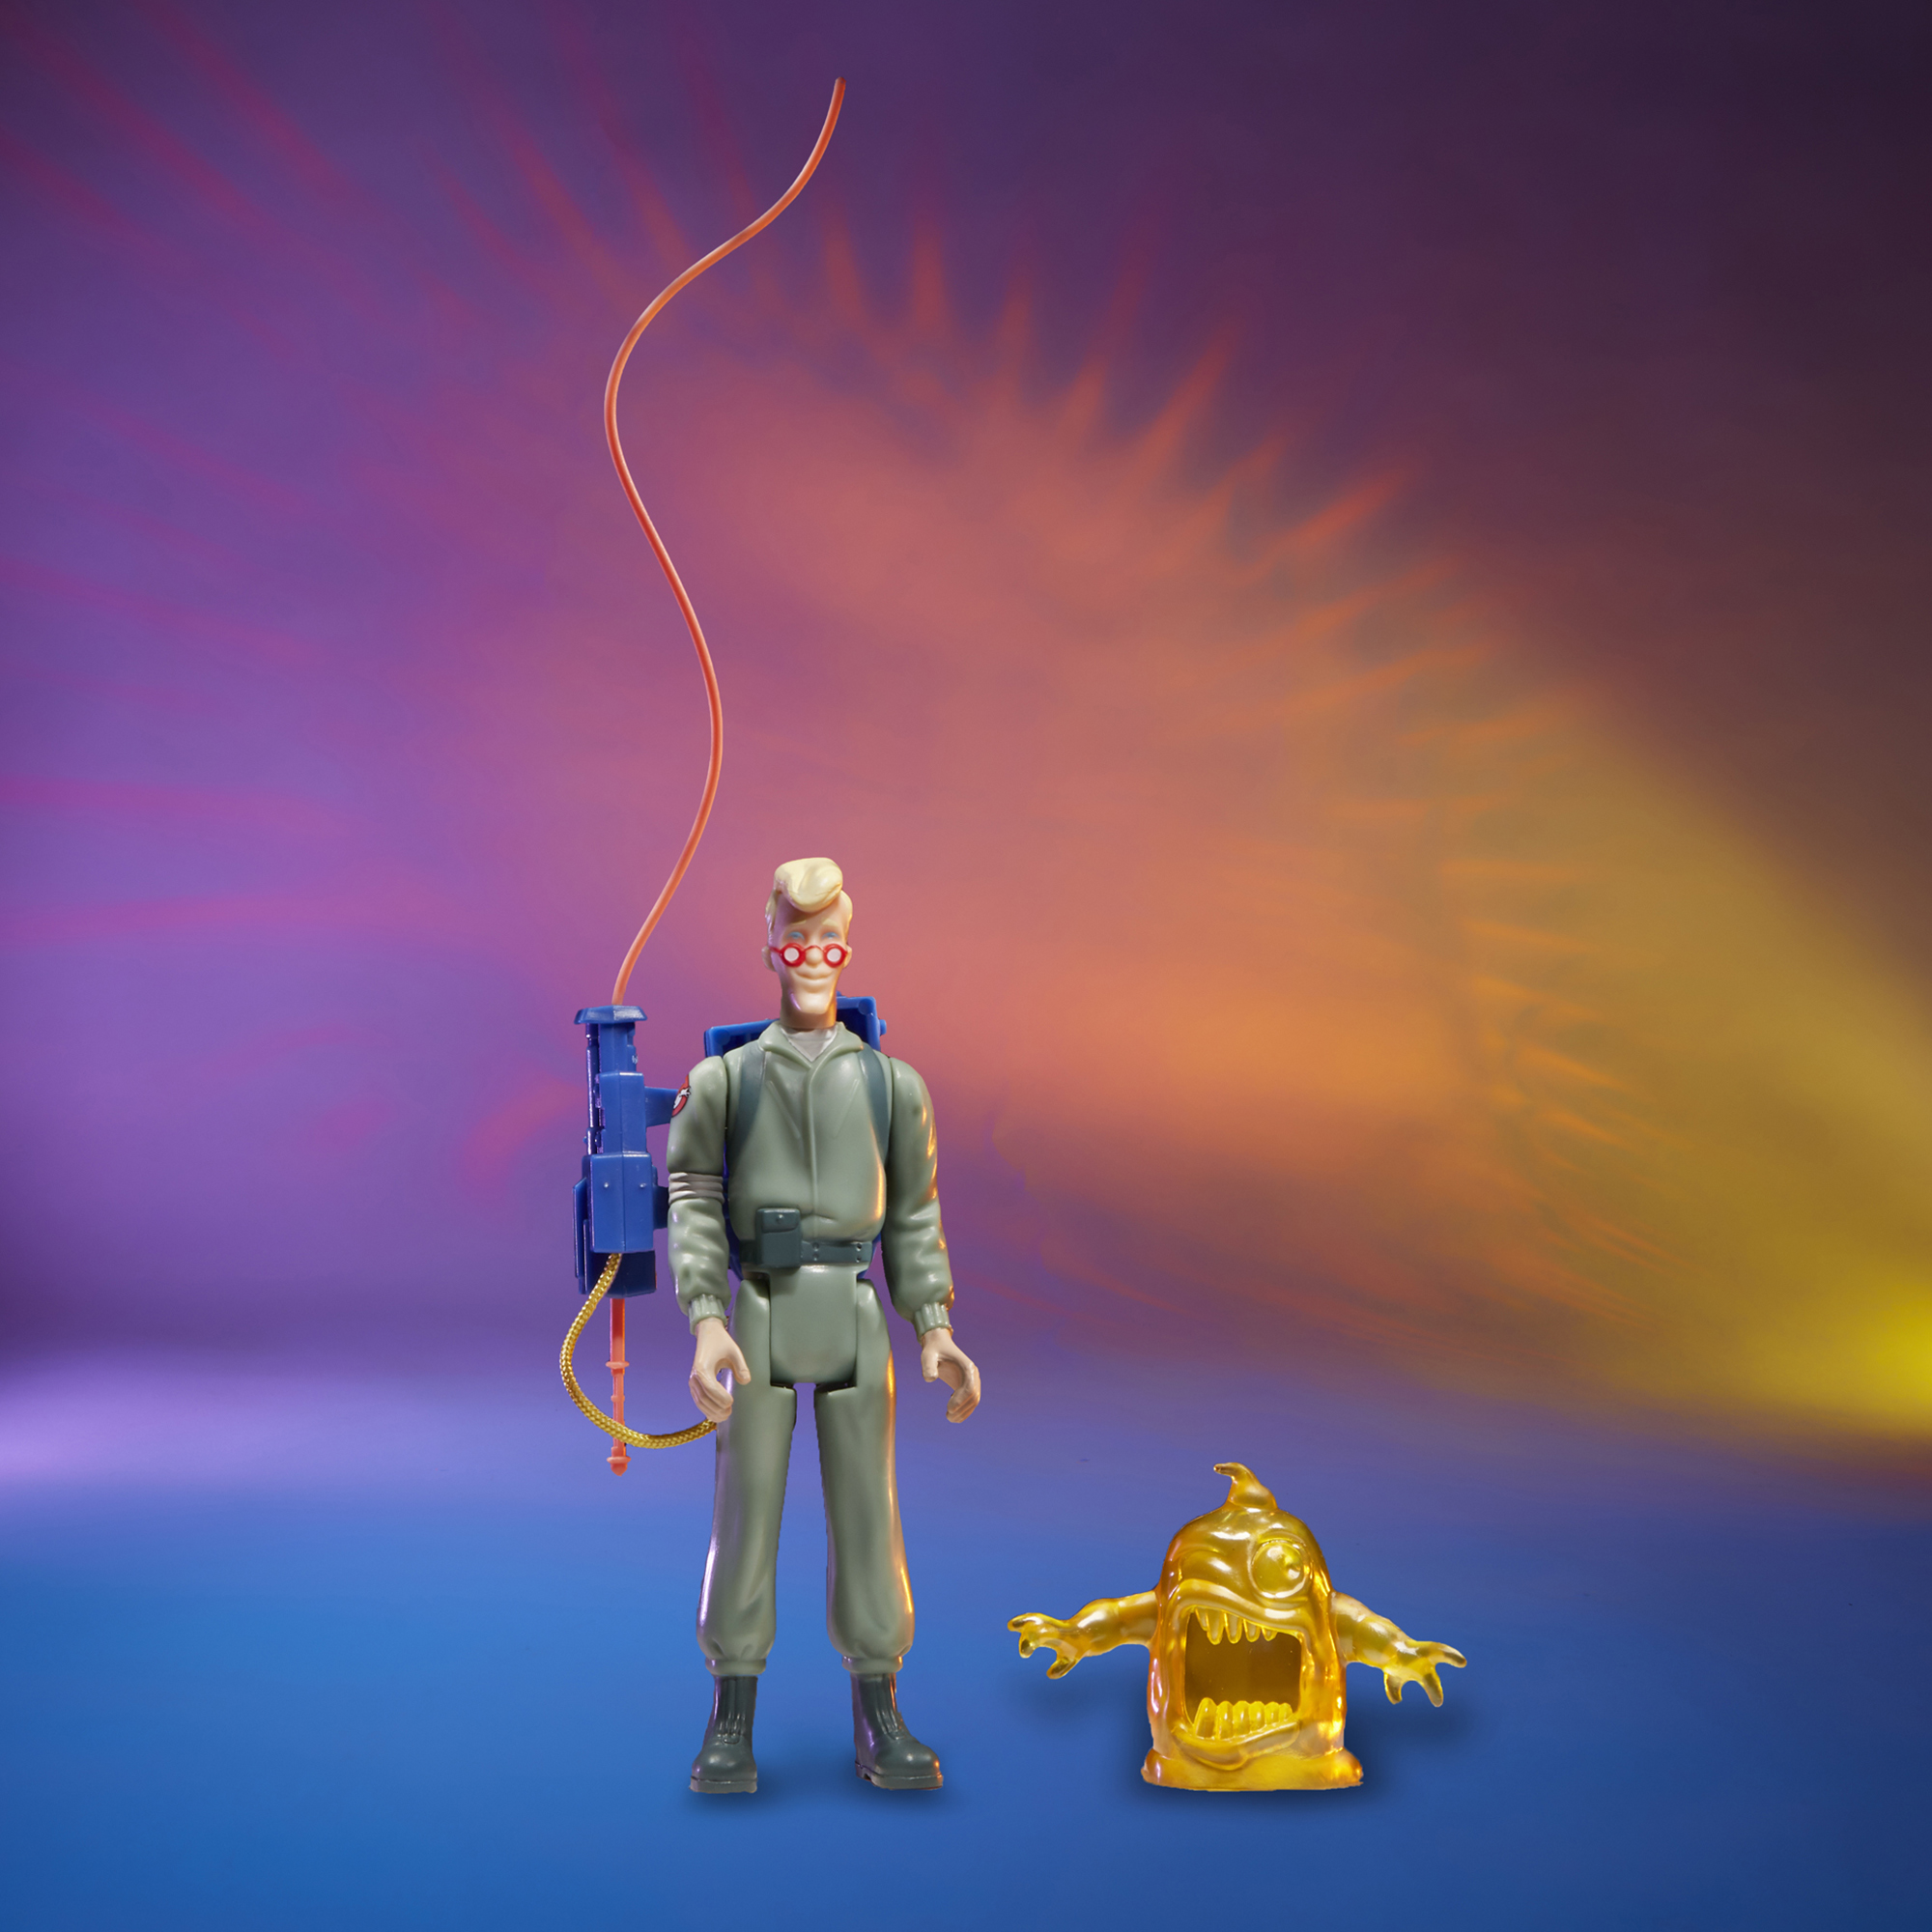 Ghostbusters Kenner Classics Egon Spengler and Gulper Ghost Action Figure - image 3 of 6